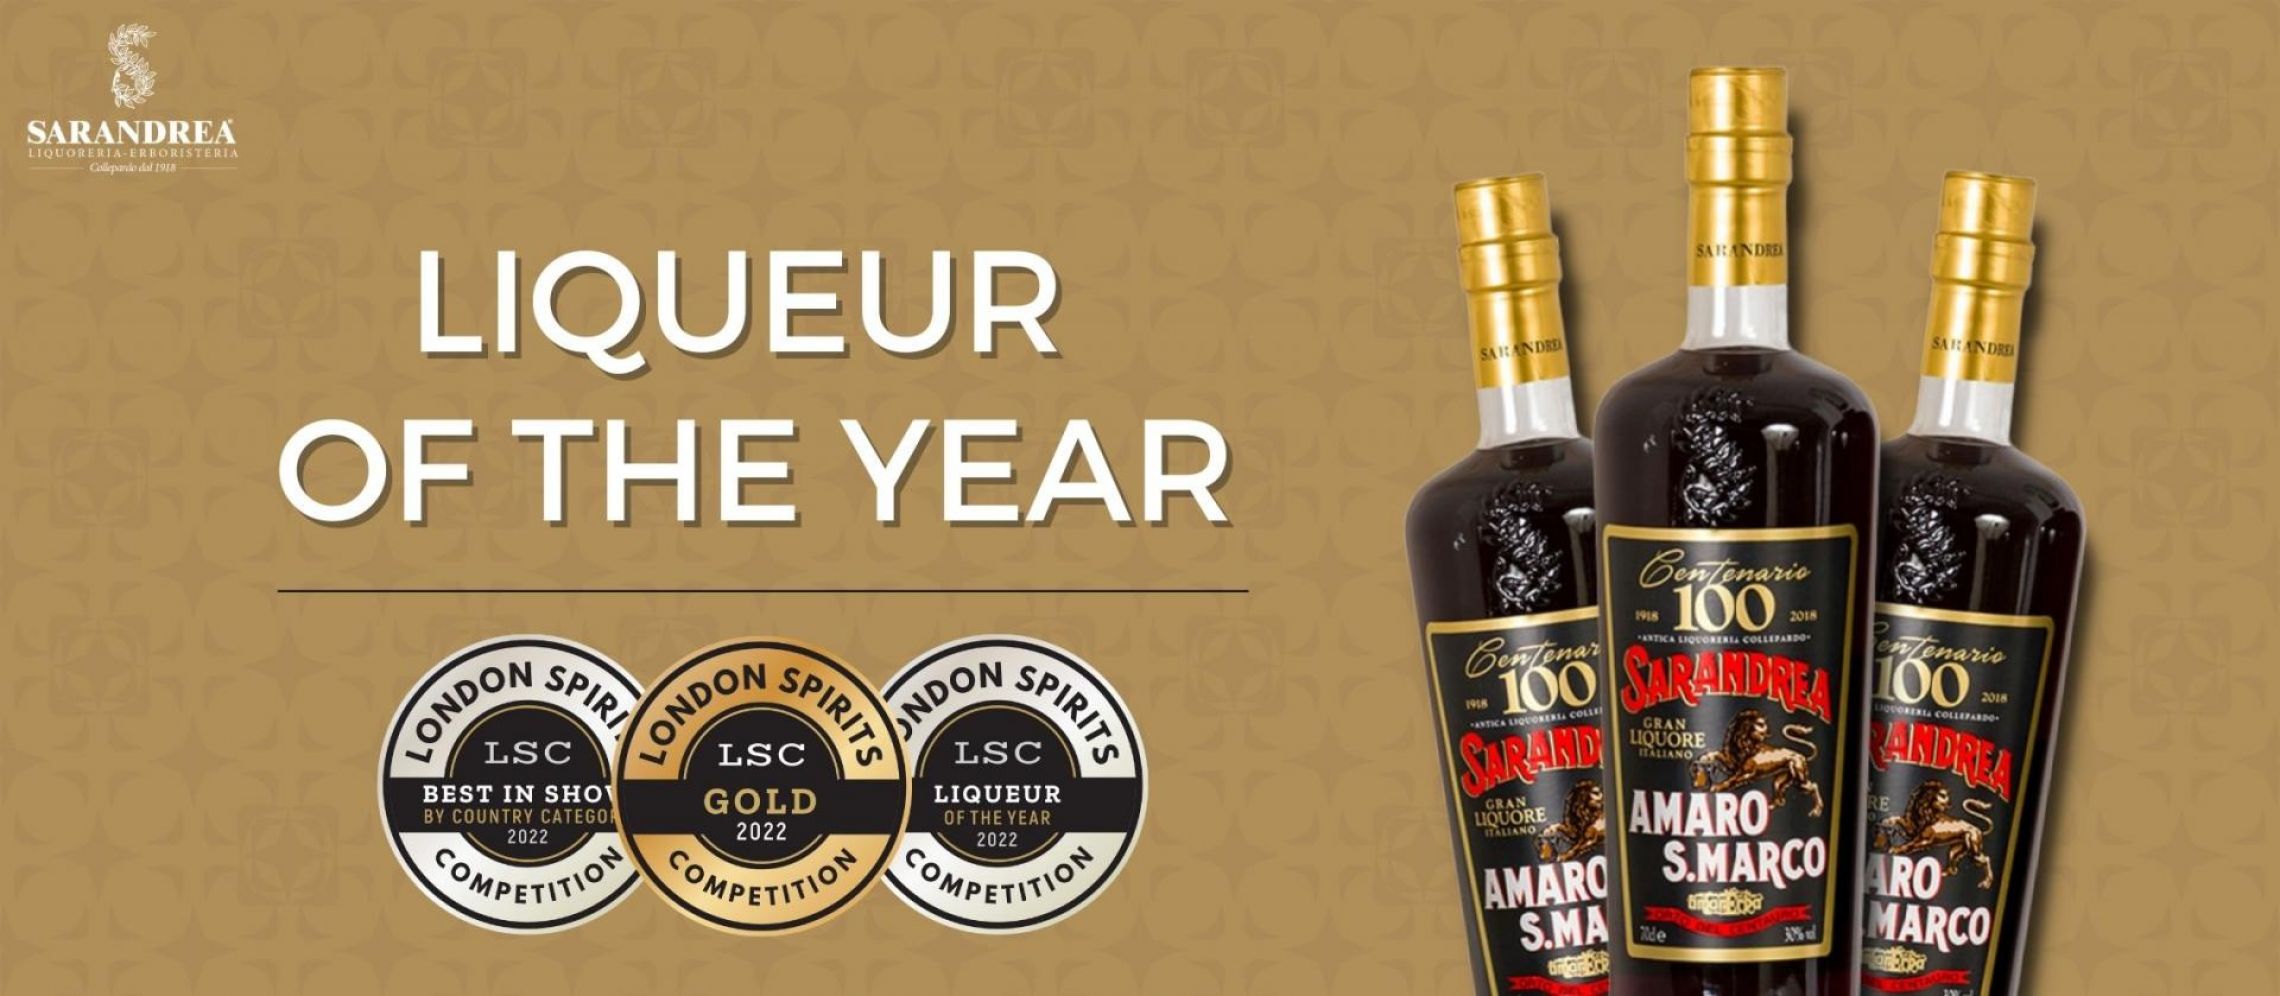 Photo for: Italy's Amaro San Marco claims Liqueur of the Year 2022